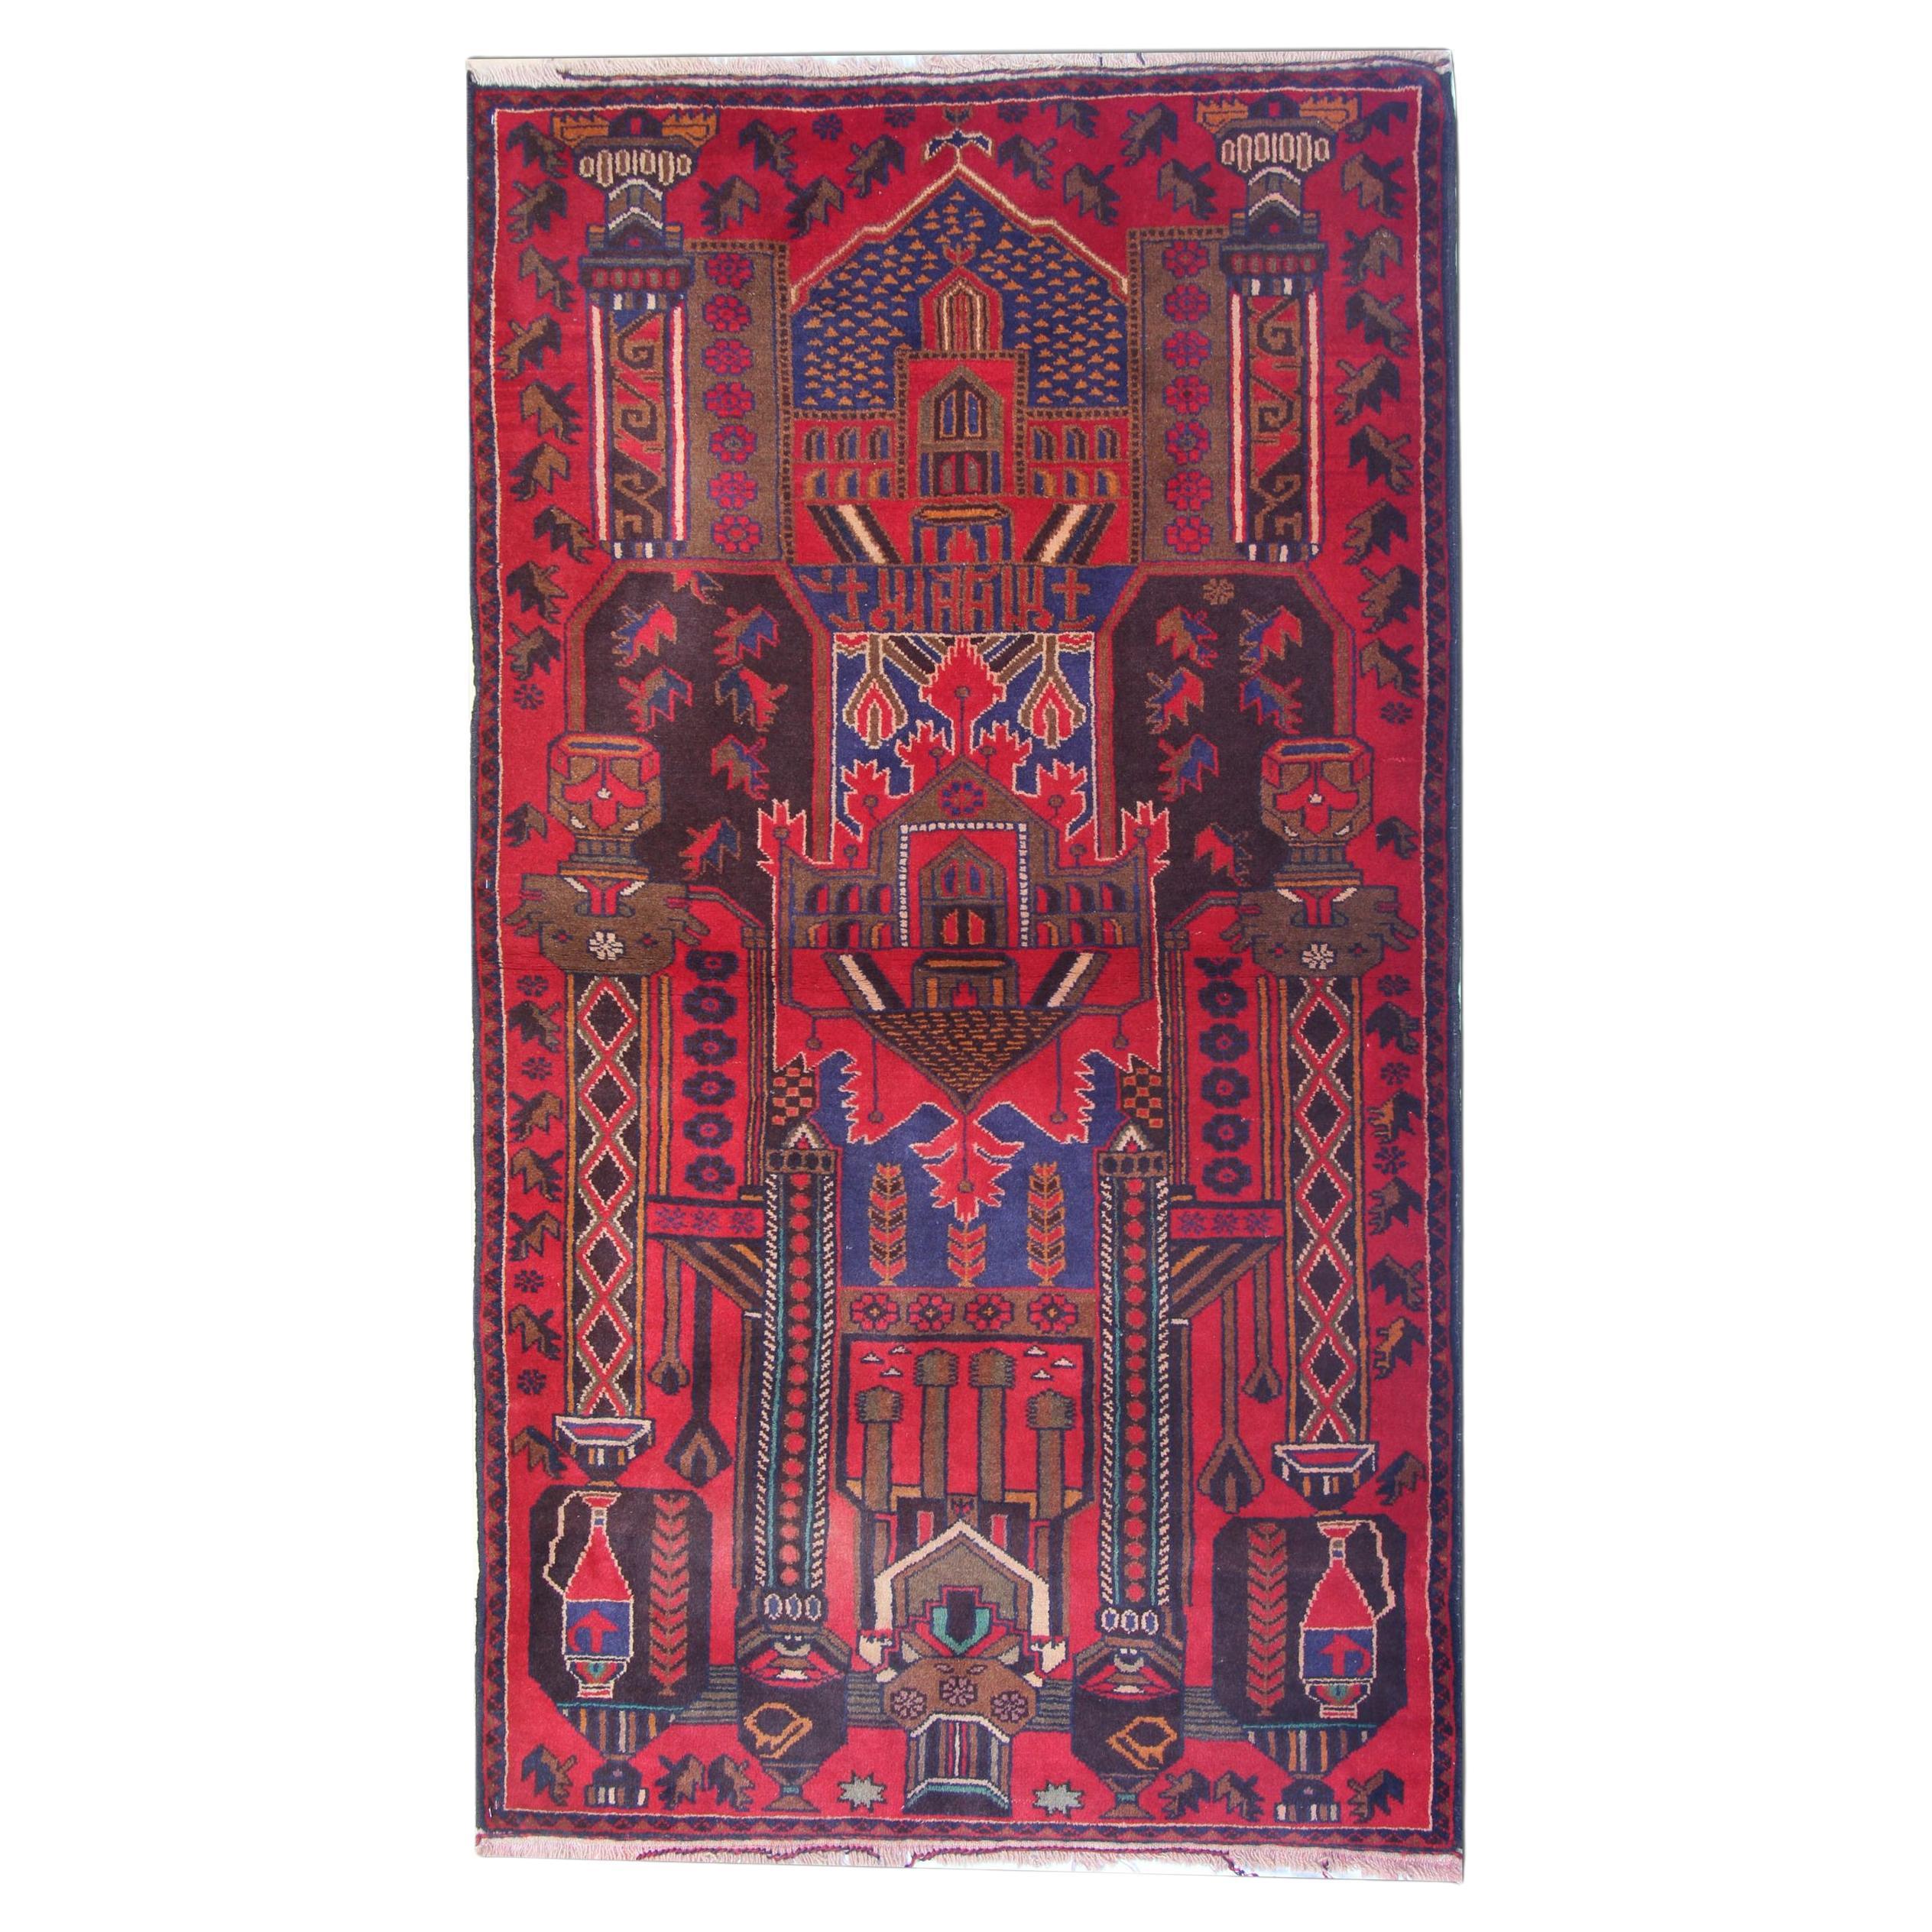 Red Carpet, Geometric Rustic Rug, Vintage Rugs for Sale For Sale